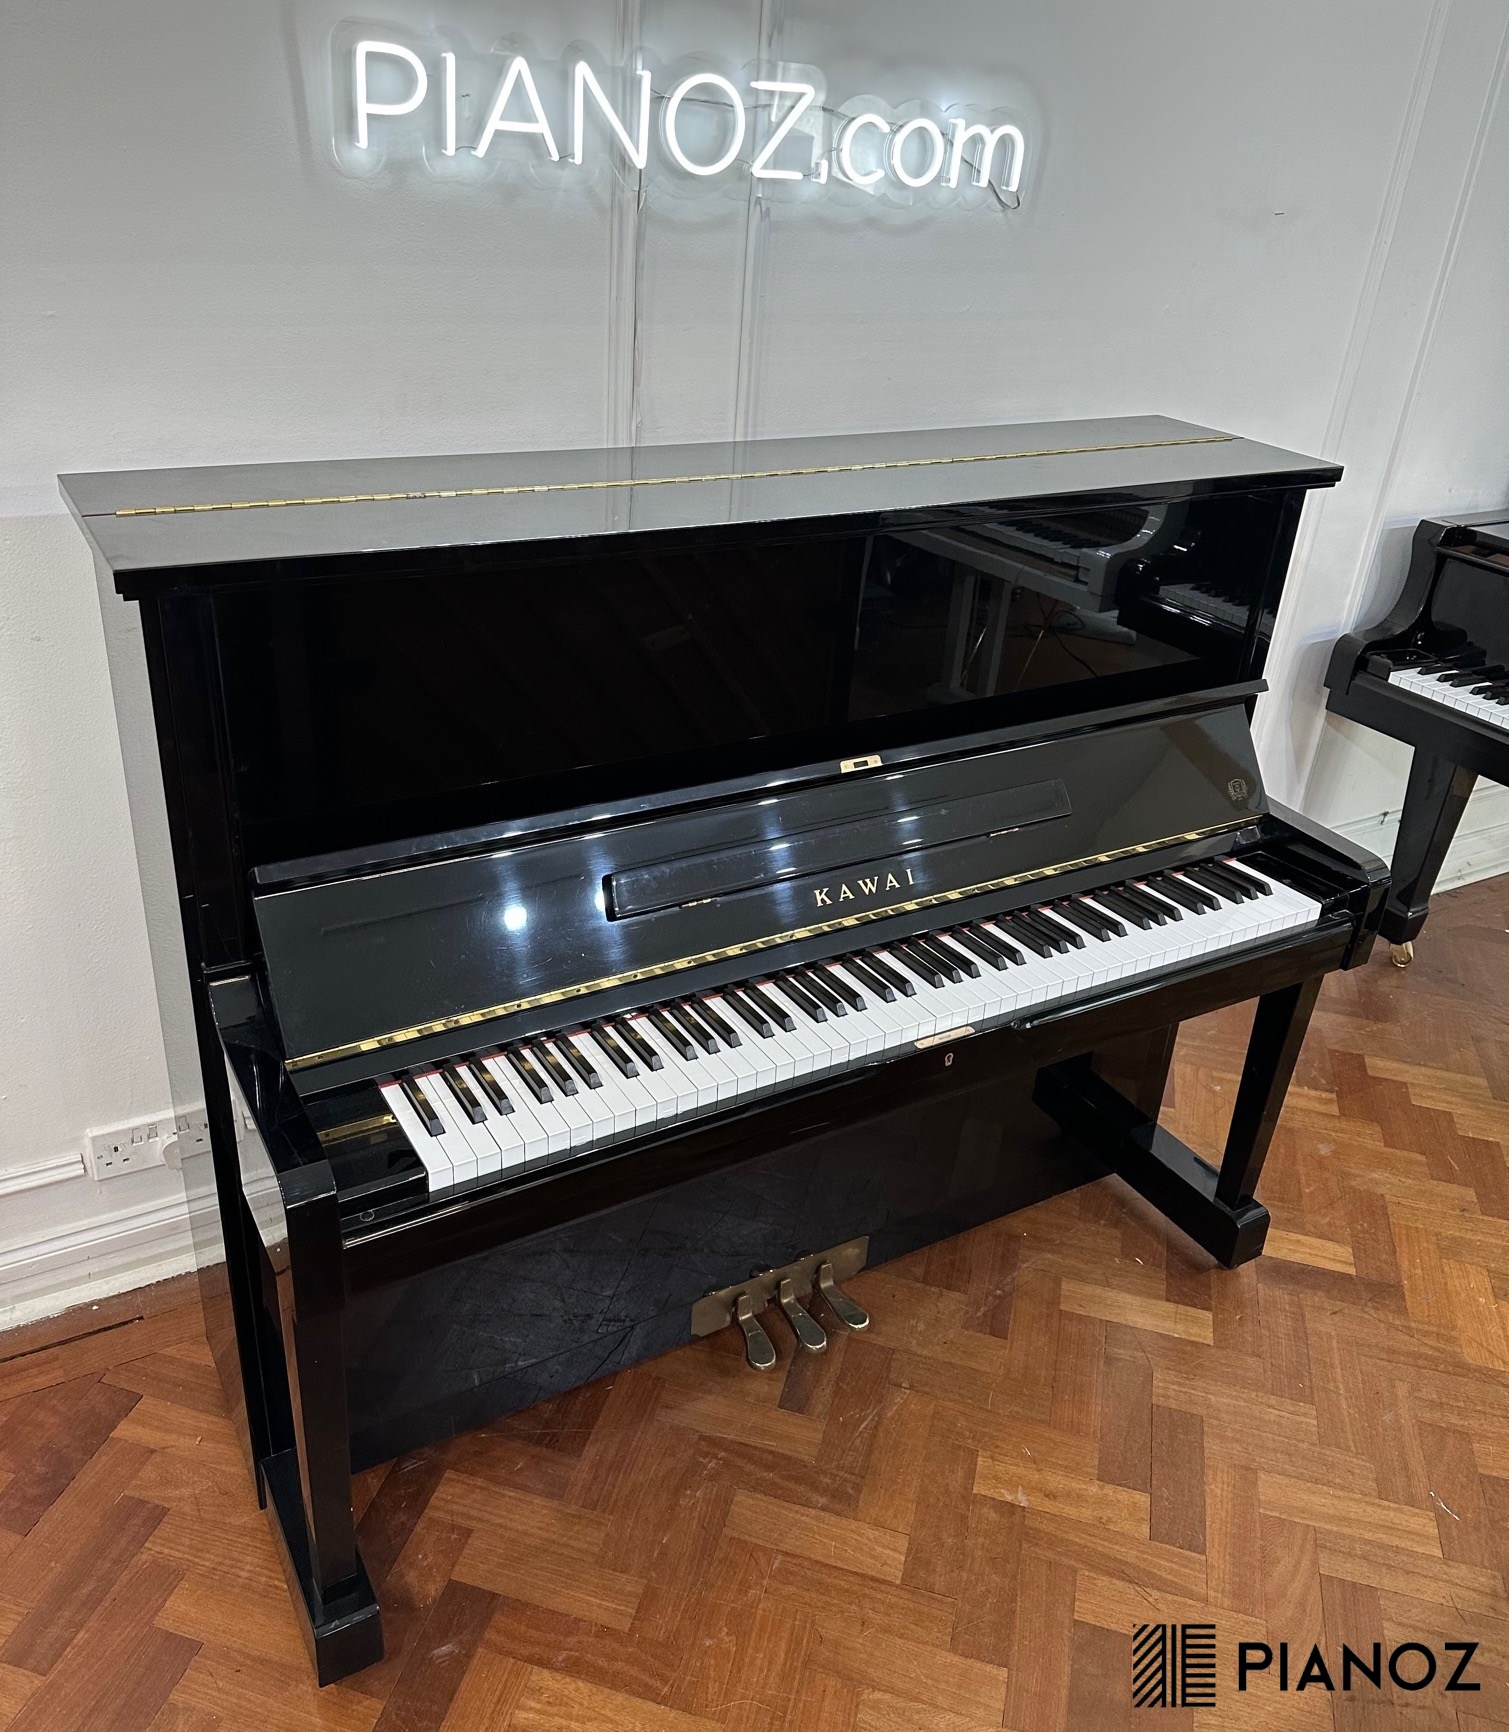 Kawai BS20 Upright Piano piano for sale in UK